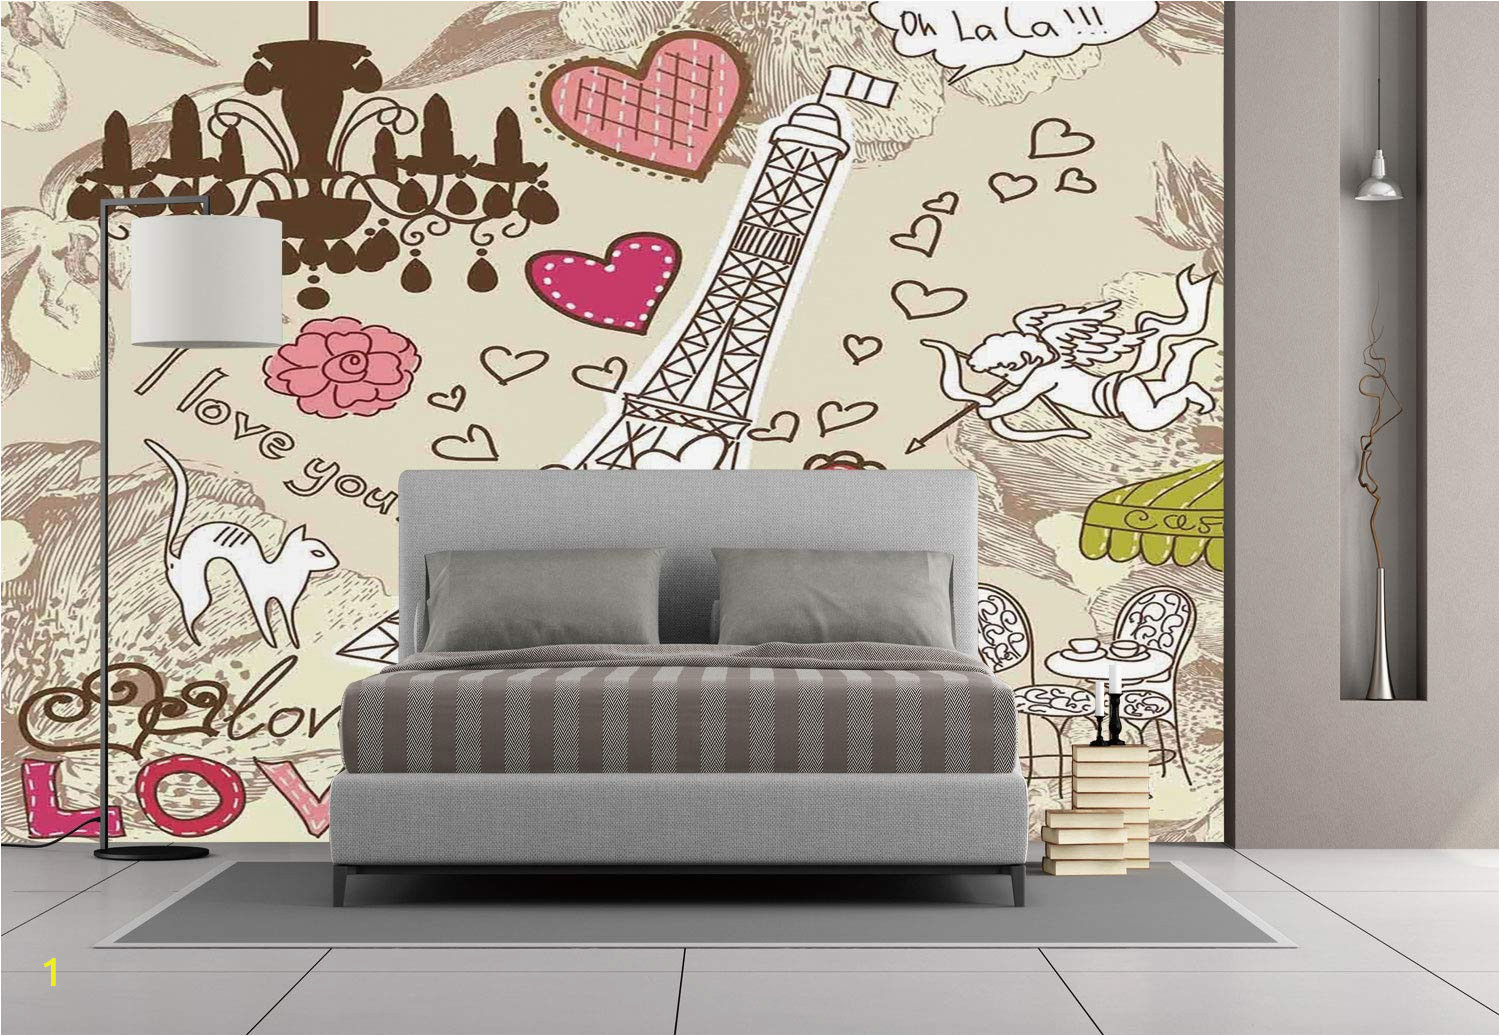 Removable Floral Wall Mural Amazon Wall Mural Sticker [ Paris Decor Doodles